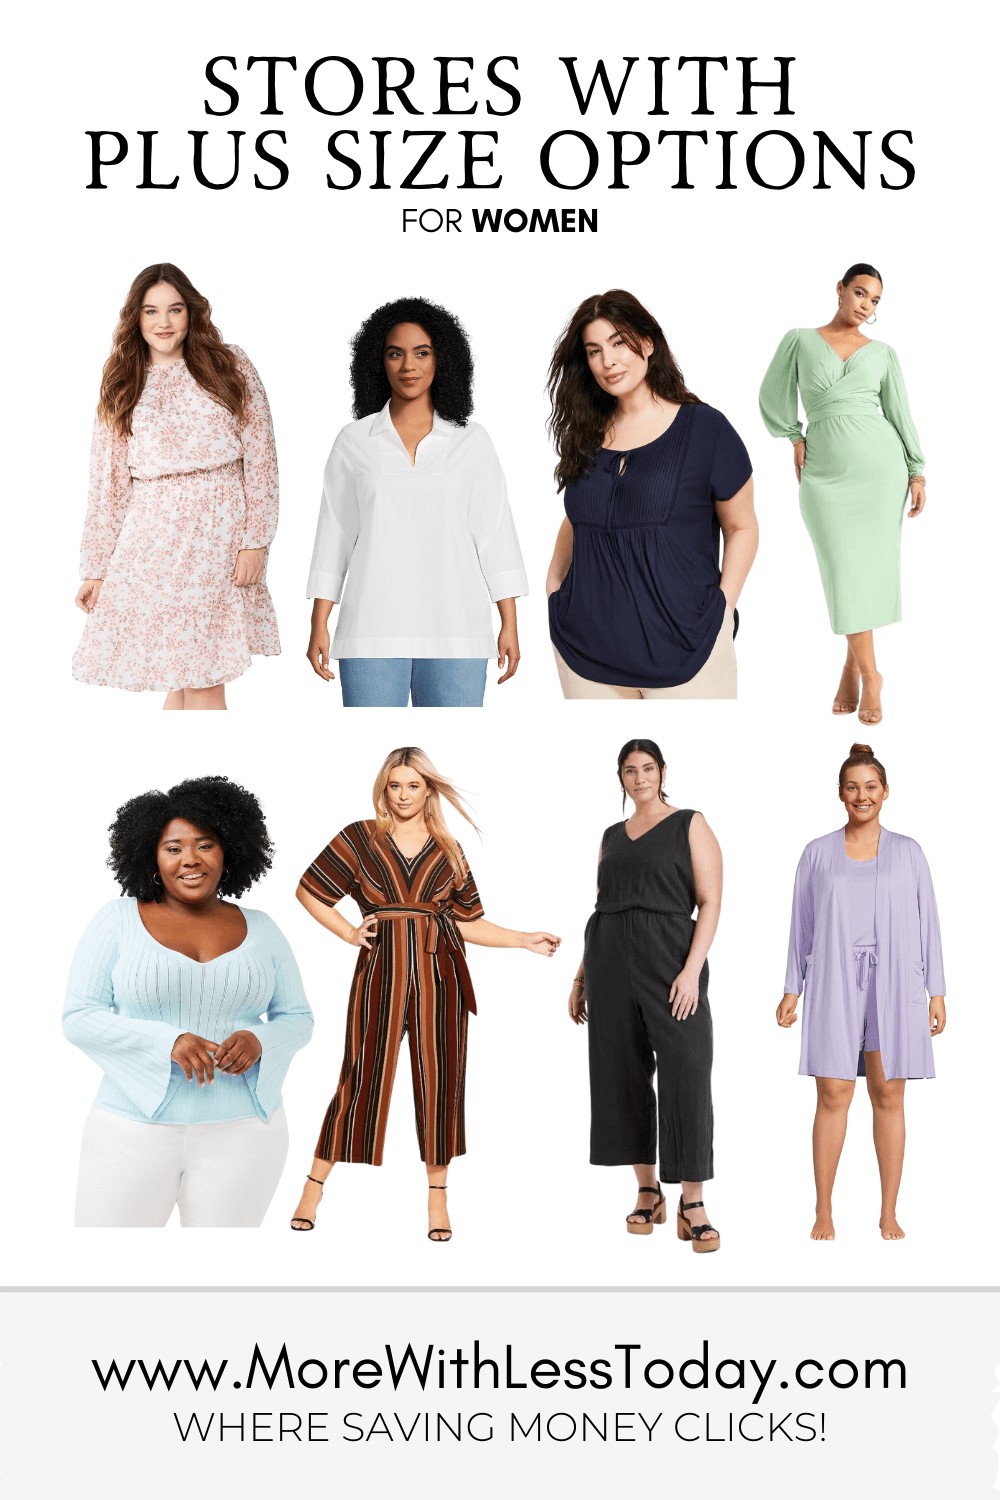 Stores with Plus Size Options for Women - PIN